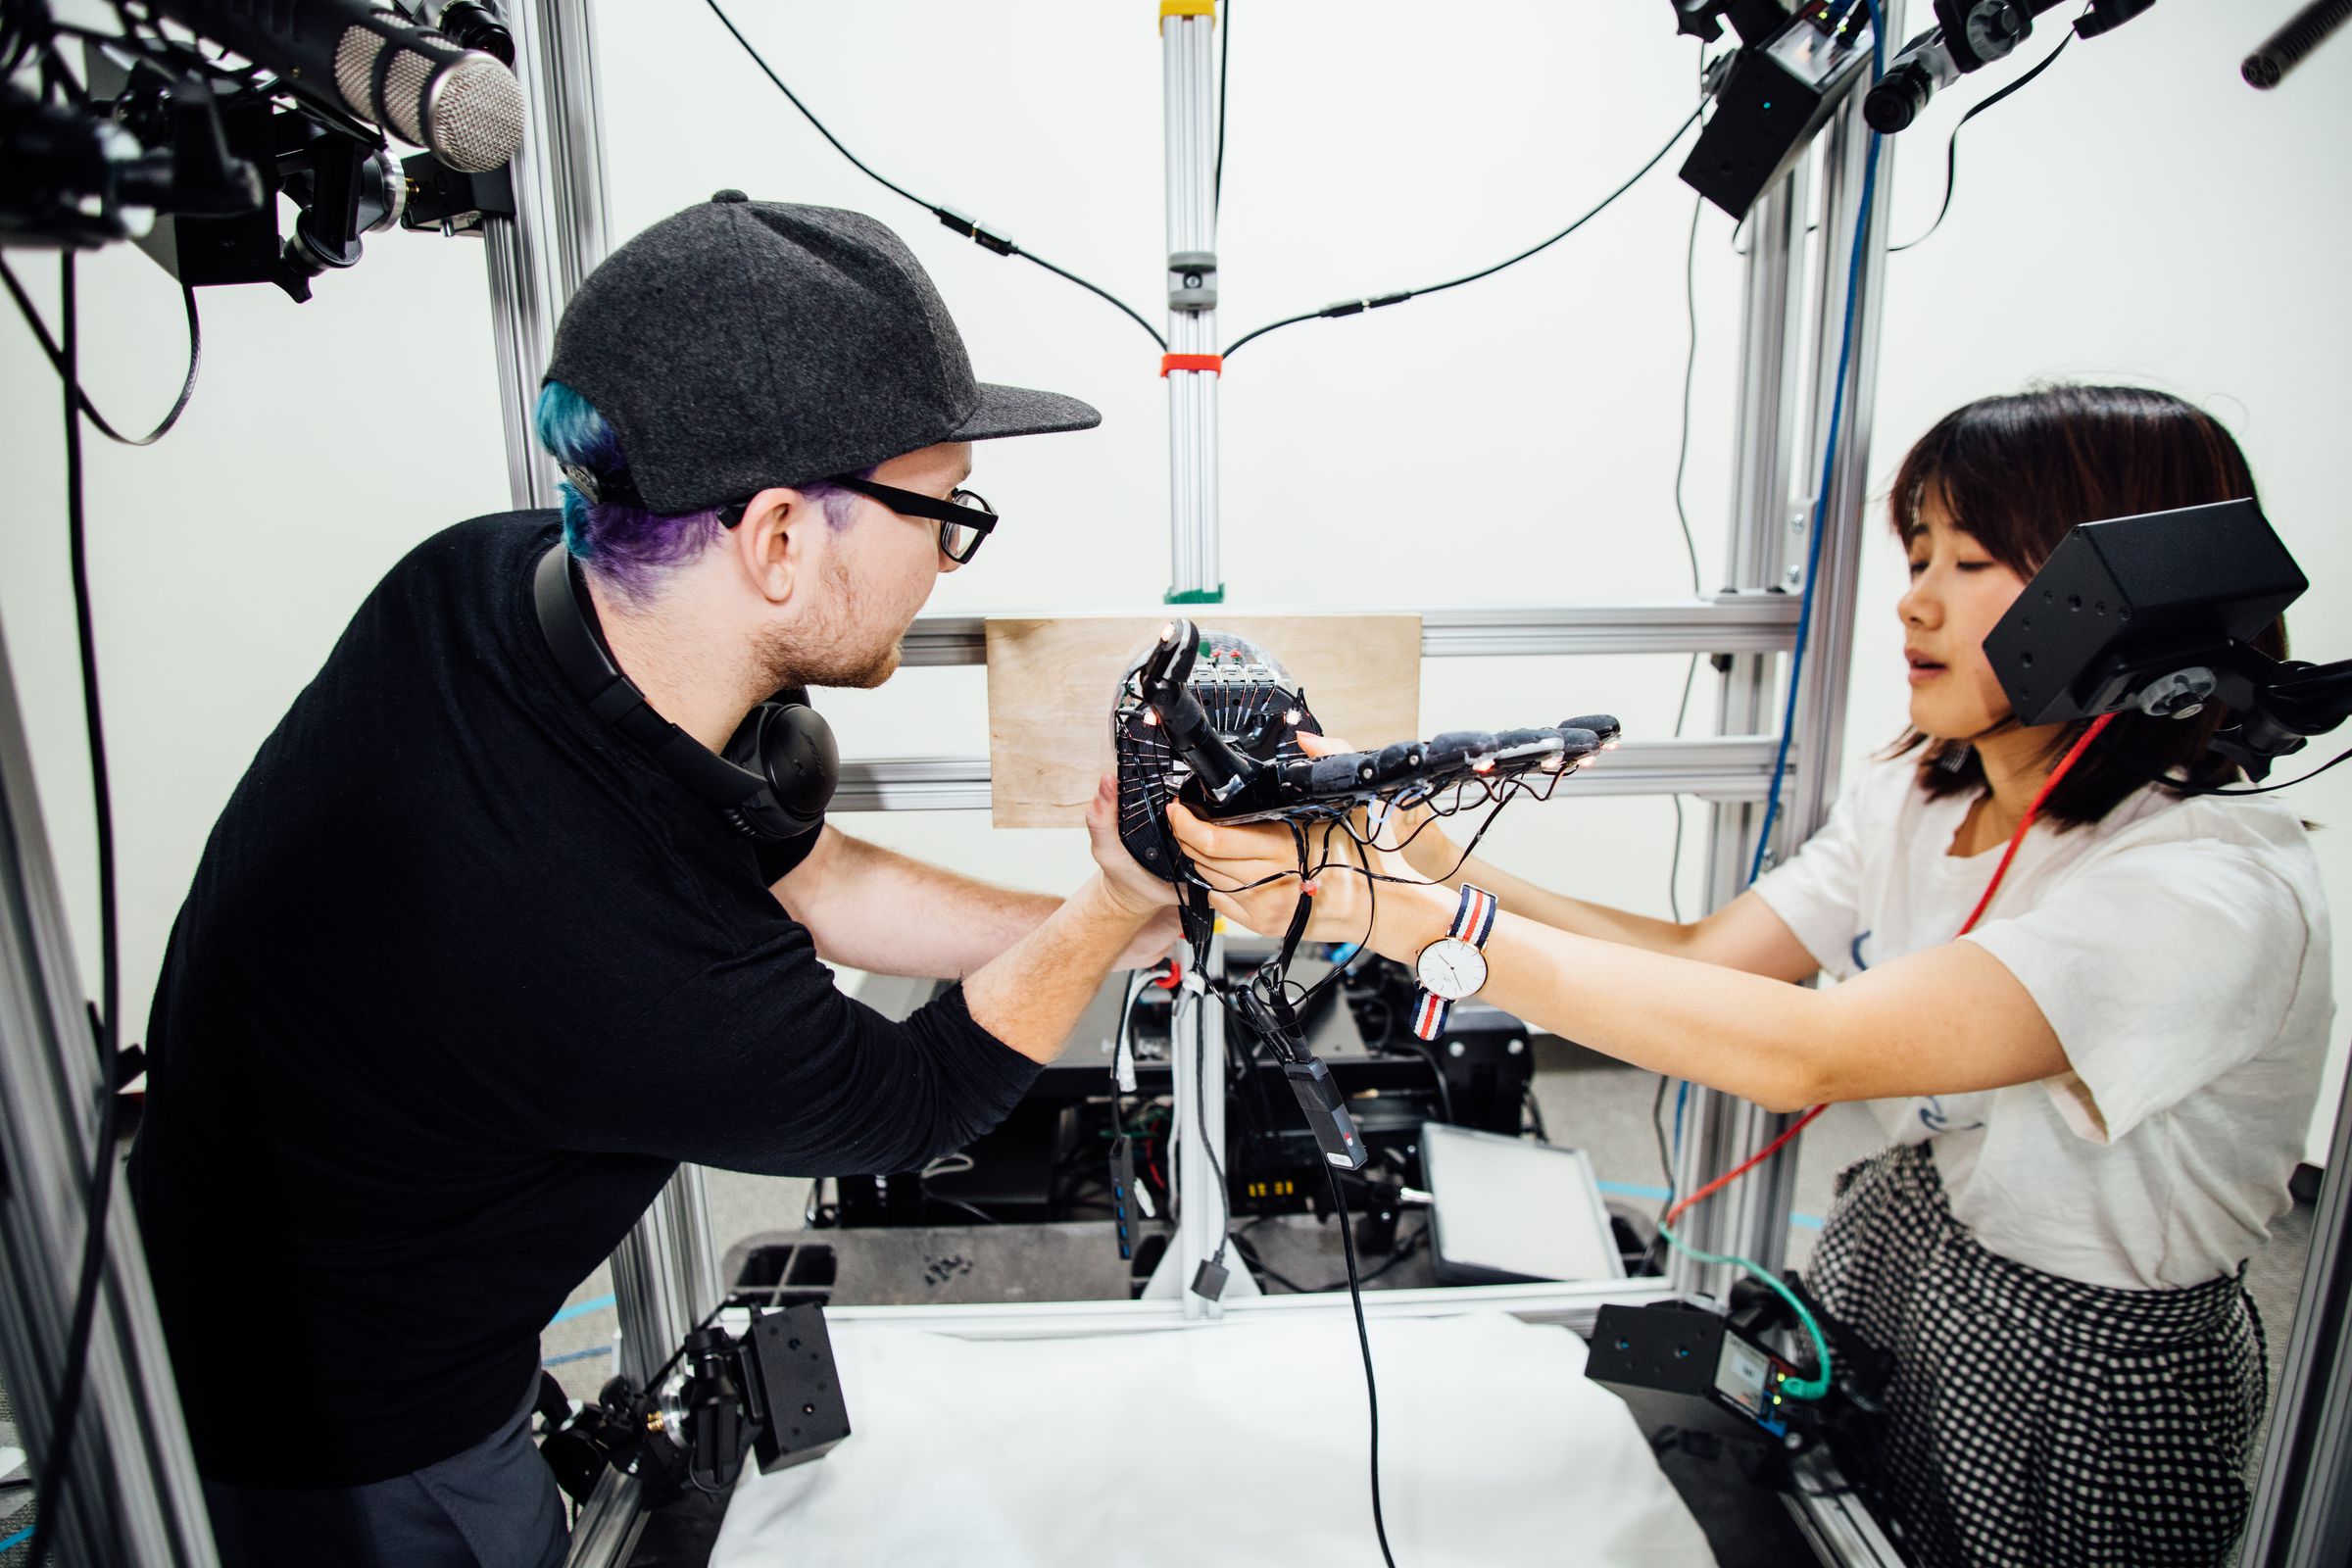 OpenAI’s researchers adjust the robotic hand controlled by their AI system Dactyl.